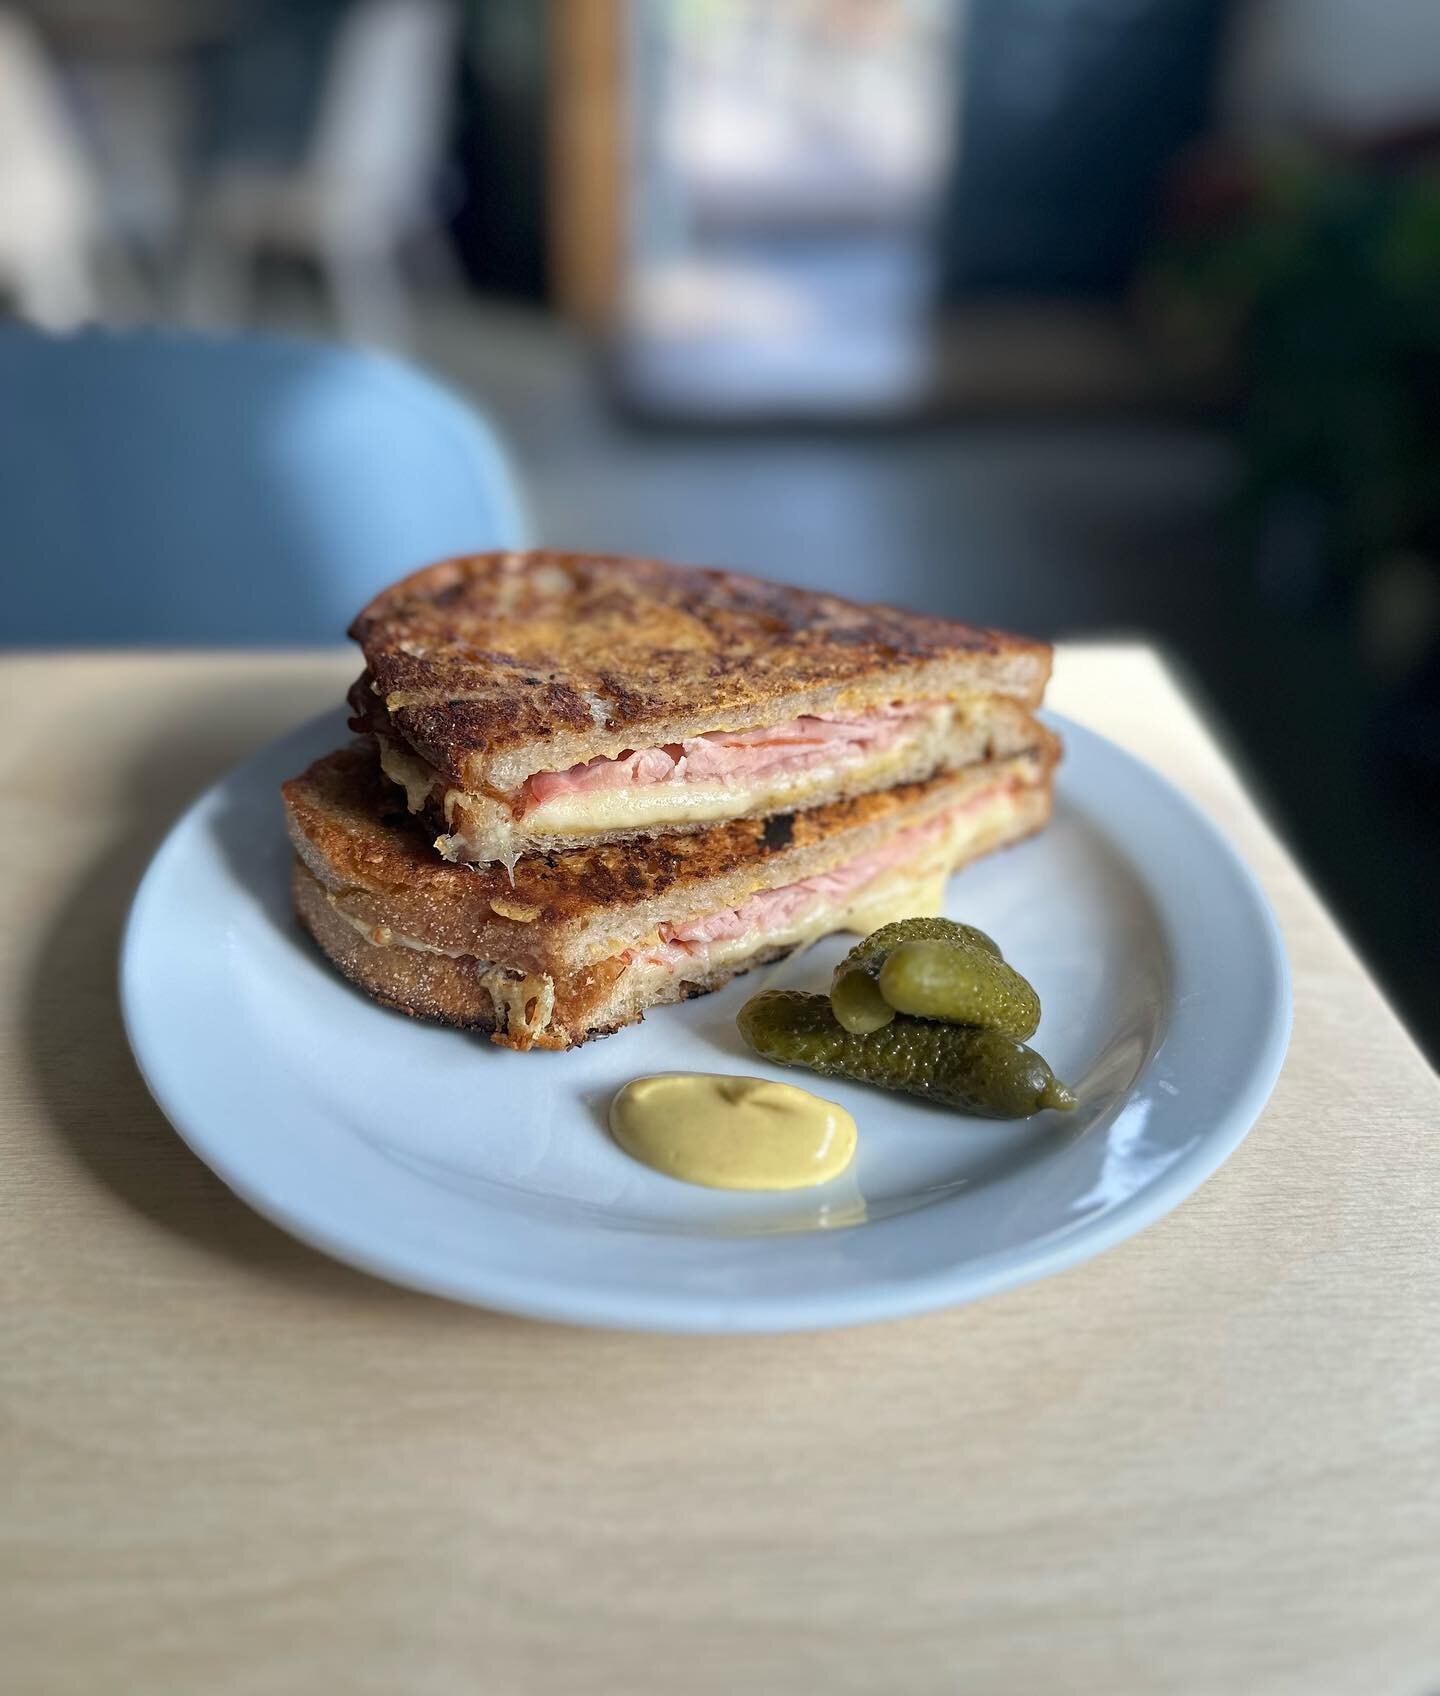 Toastie weather is here &amp; we are Open for:
&bull; Lunch from 11.30-3pm
&bull; Coffee &amp; pastries from 7am
&bull; Dinner 5.30-9pm

#hackneywick #coffee #hackneywickfood #cheesetoastie